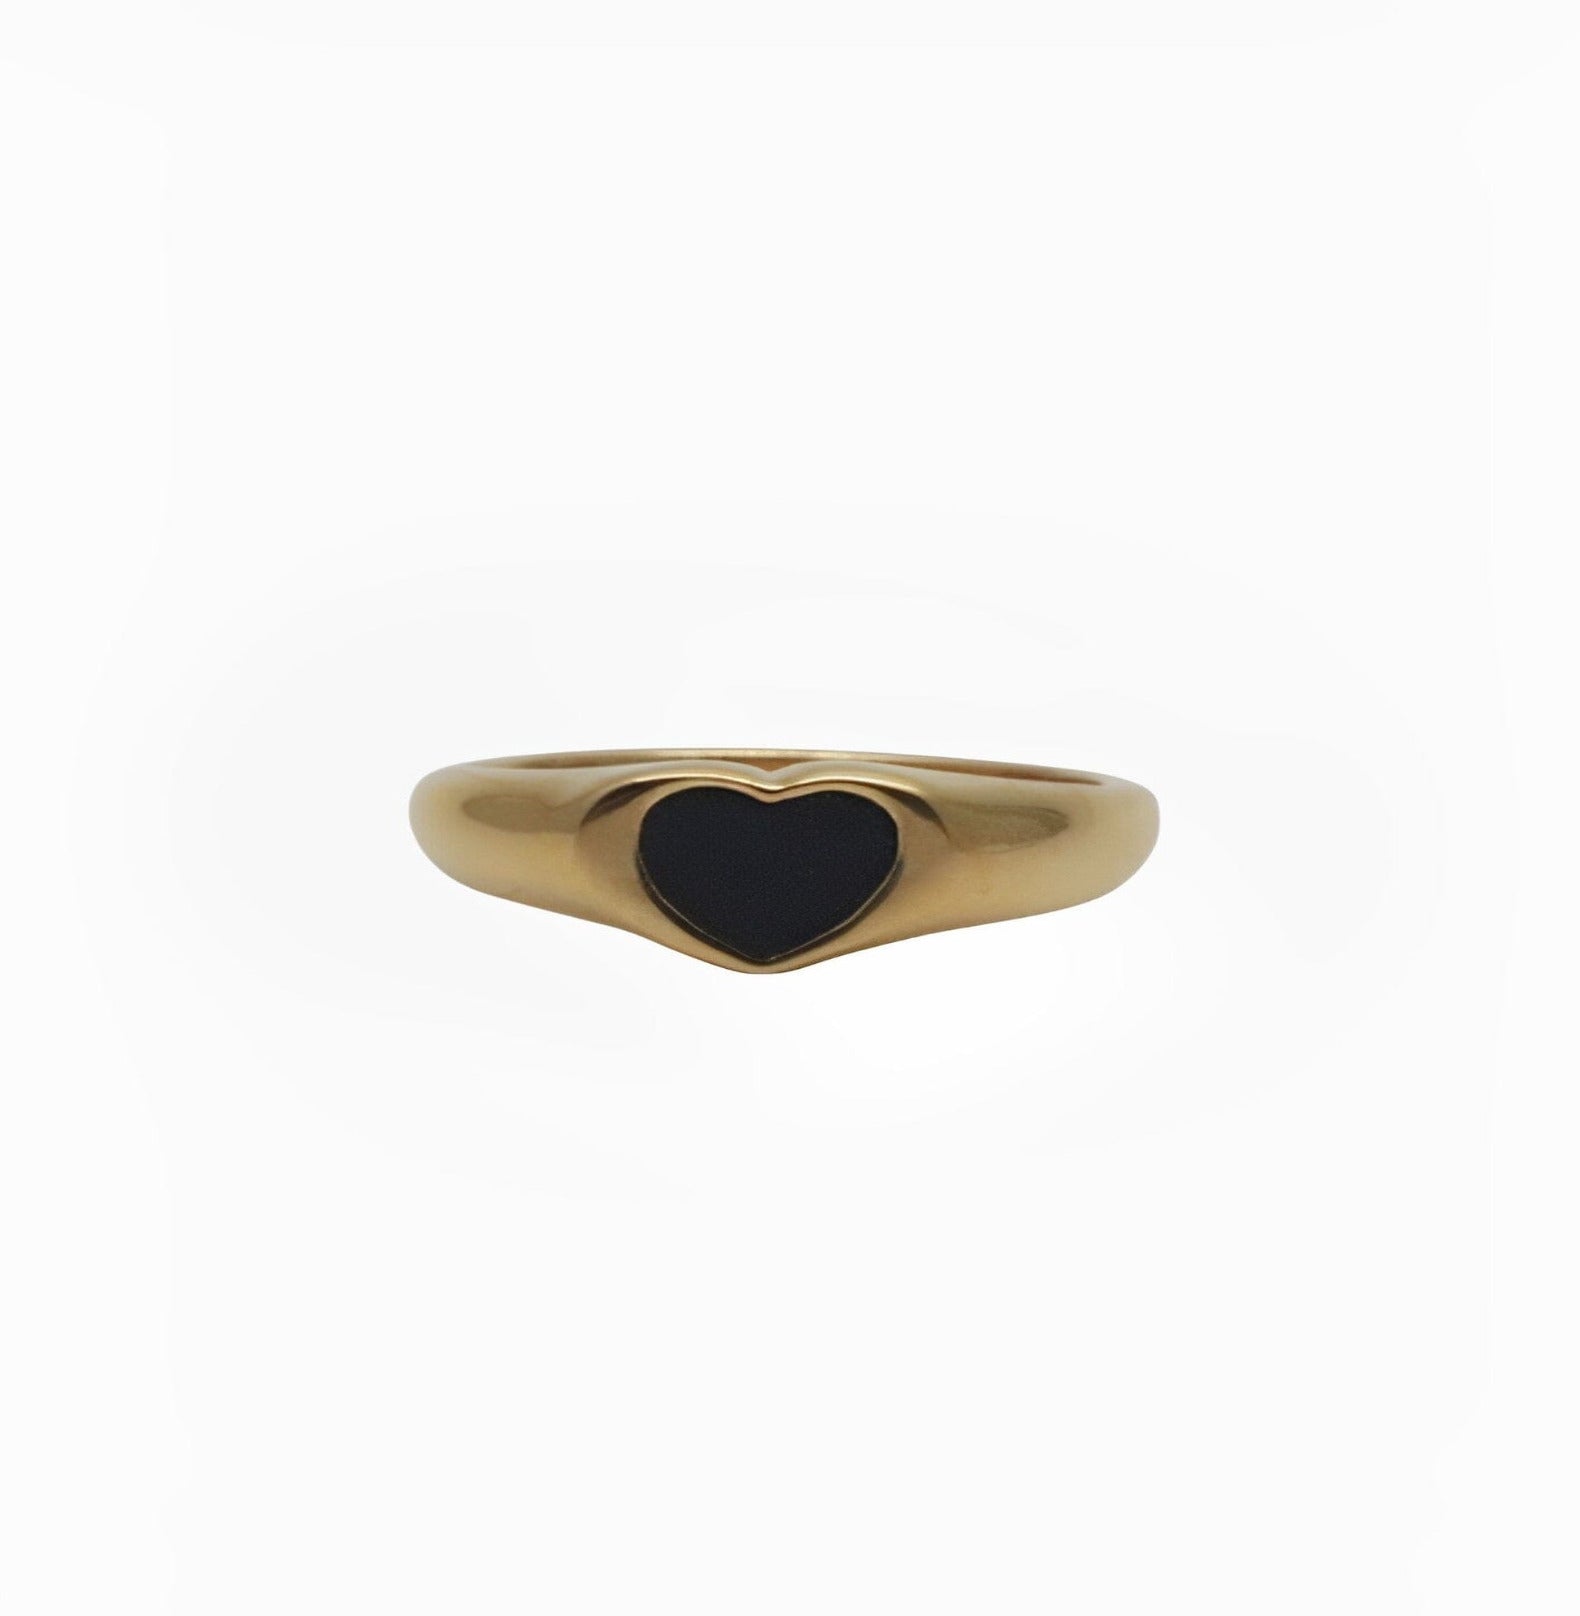 BLACK HEART RING ring Yubama Jewelry Online Store - The Elegant Designs of Gold and Silver ! 